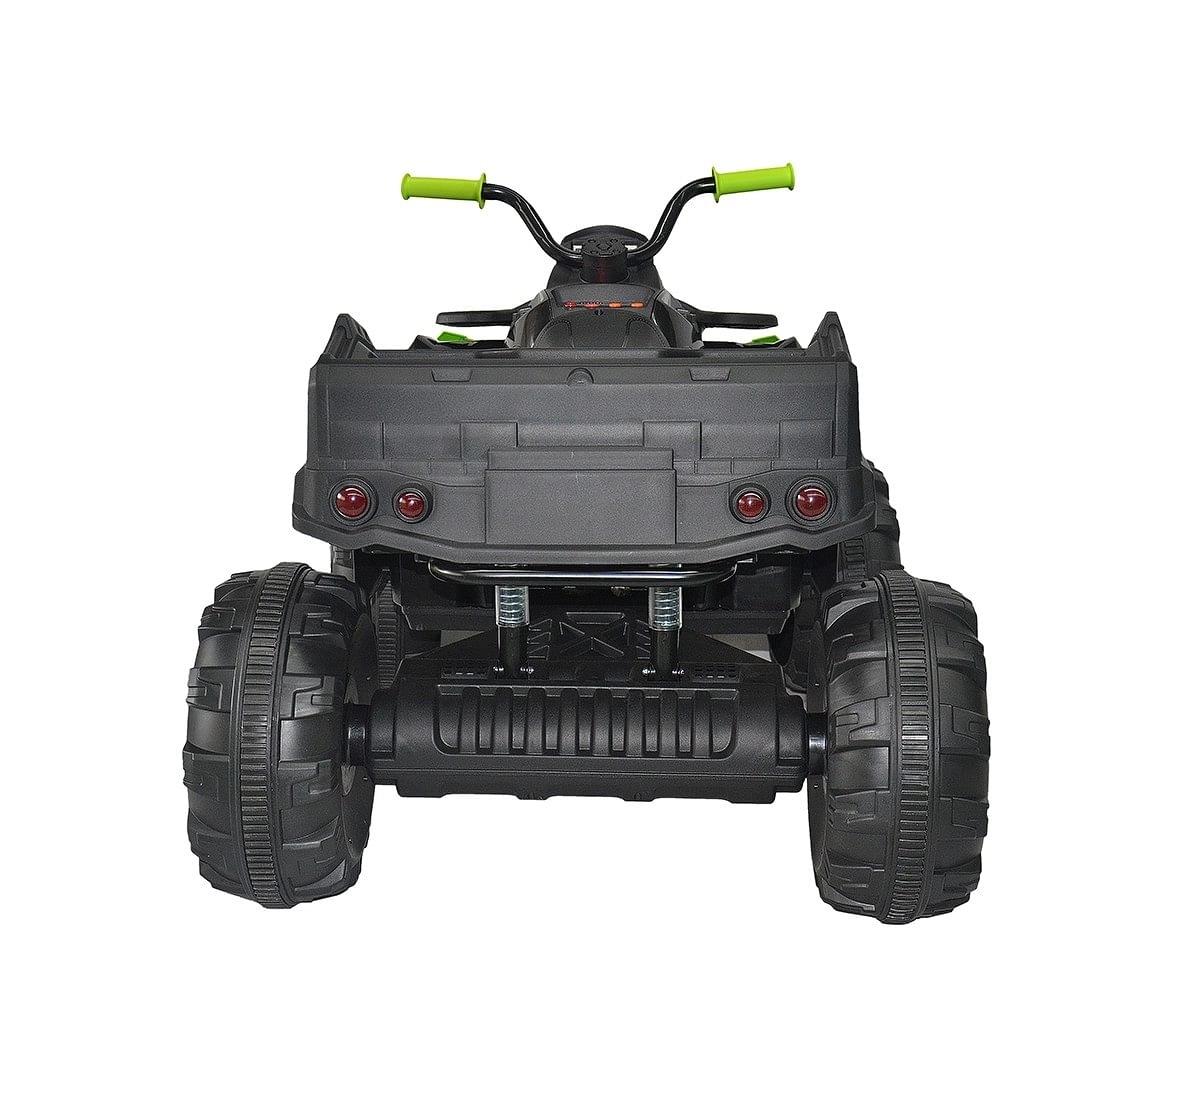 Bettyma Atv Rc Buggy 2.5Ghz - Black Battery Operated Rideons for Kids age 3Y+ (Black)